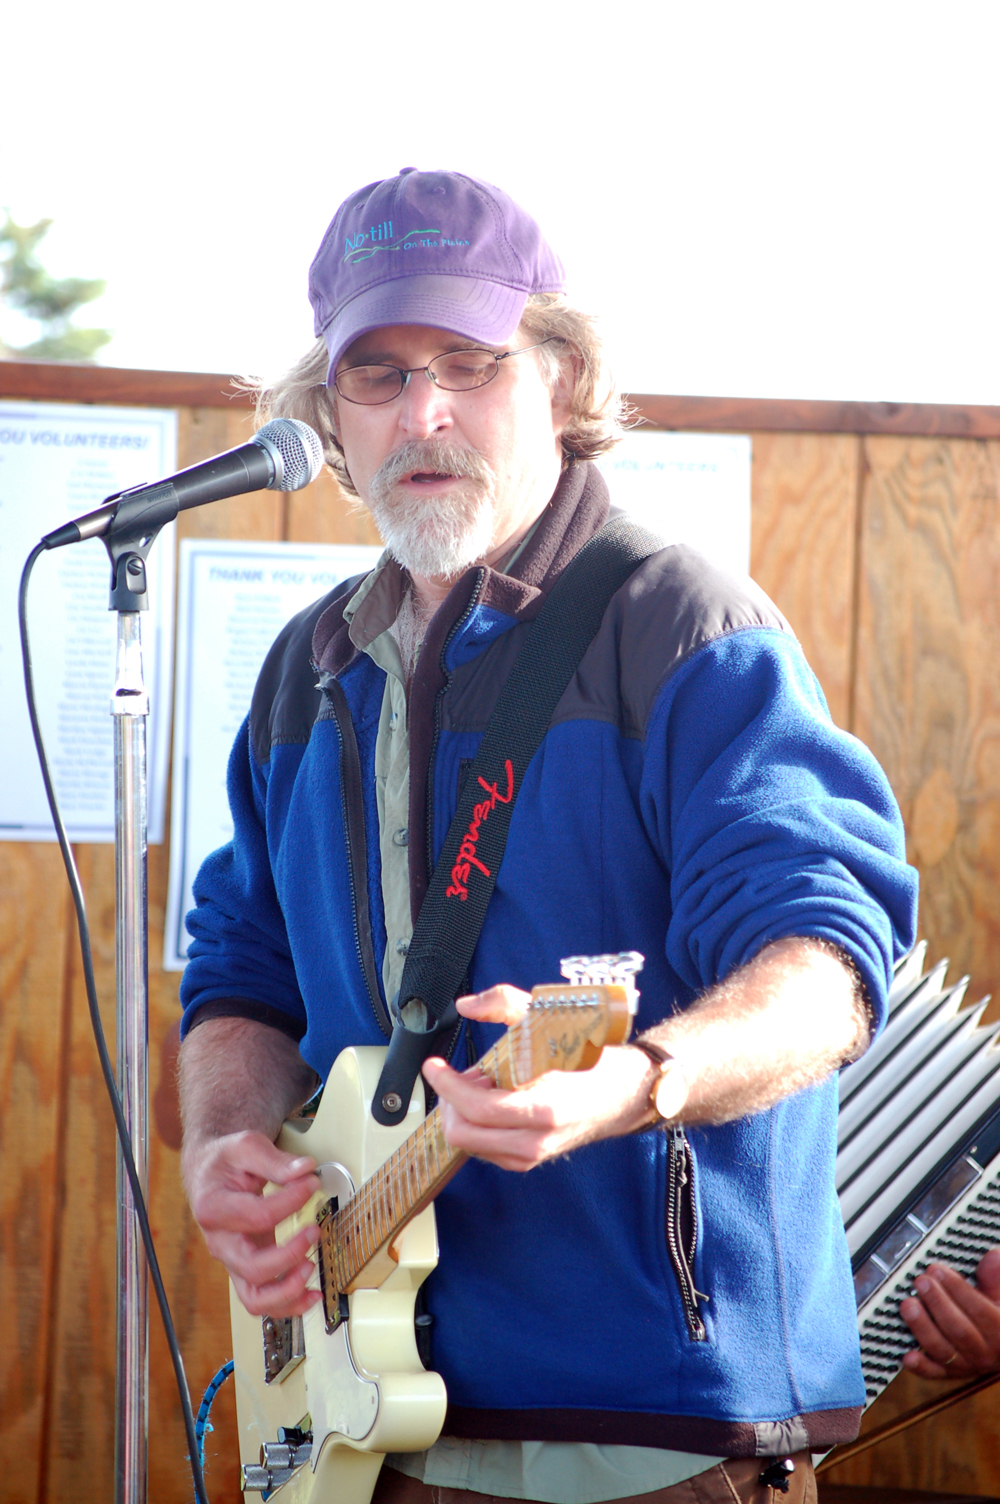 Scientist, author and musician David Montgomery plays at Cook Inletkeeper’s Splash Bash on July 31.-Photo by Michael Armstrong, Homer News